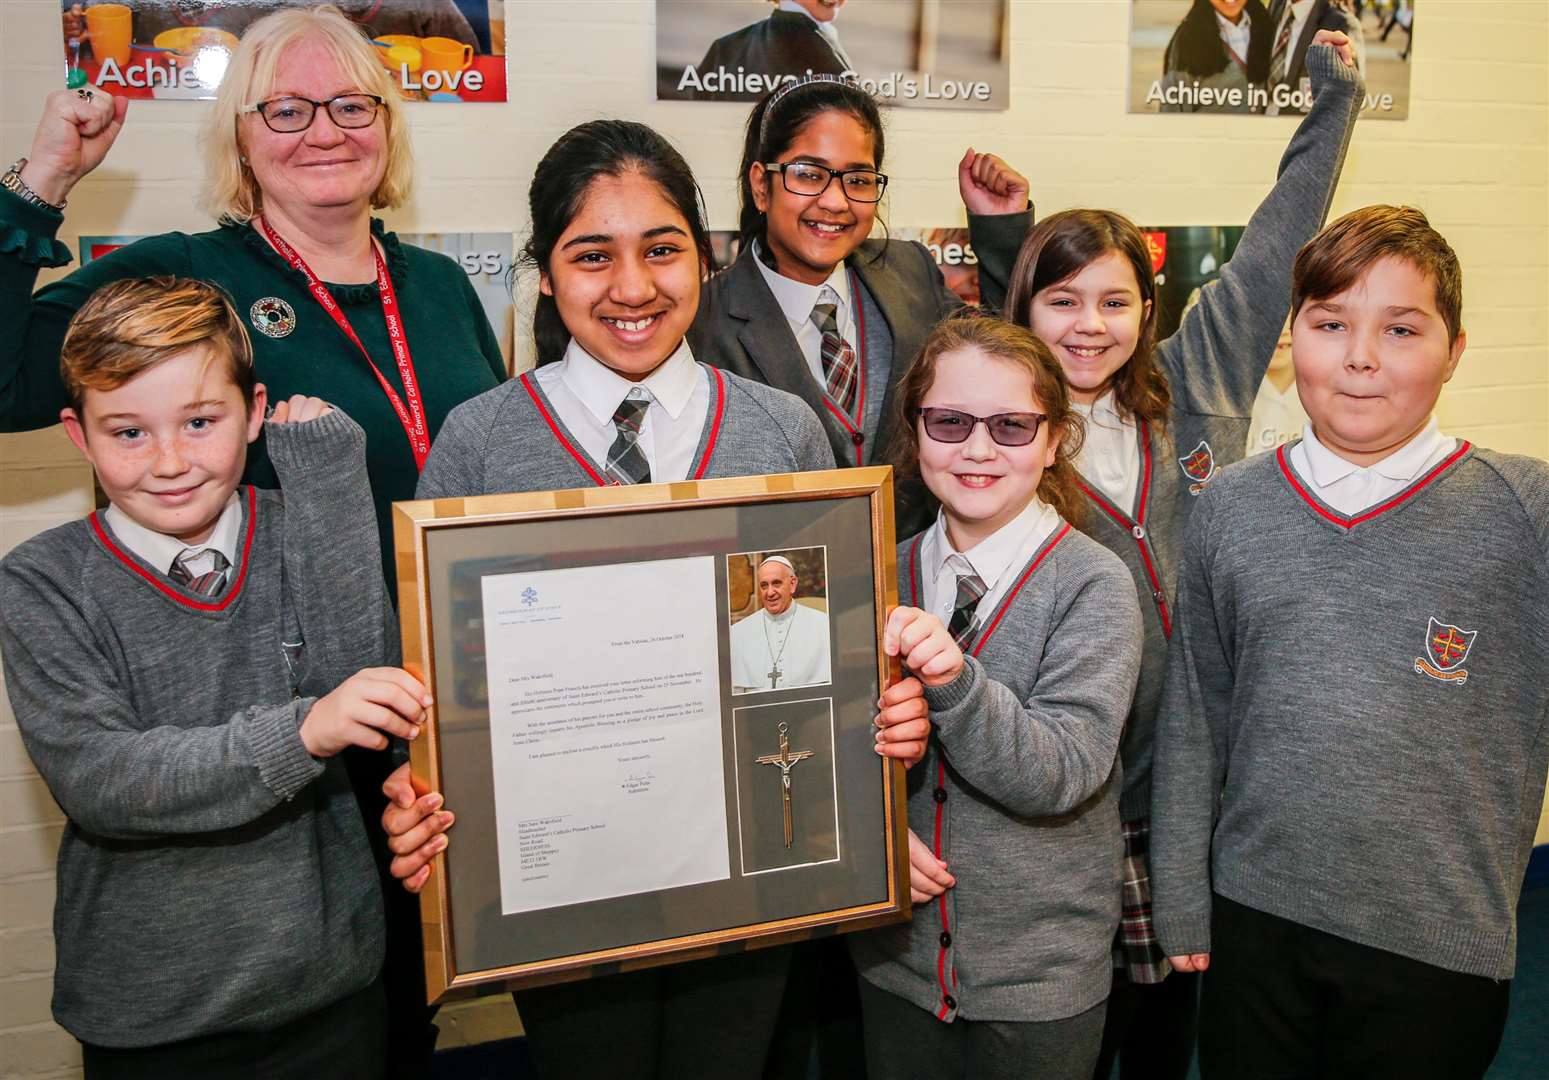 Head teacher at St Edwards Catholic Primary School, Sara Wakeford, with pupils Alex, Iqra, Naomi, Veronica, Demi-Leigh and David with their letter from Pope Francis